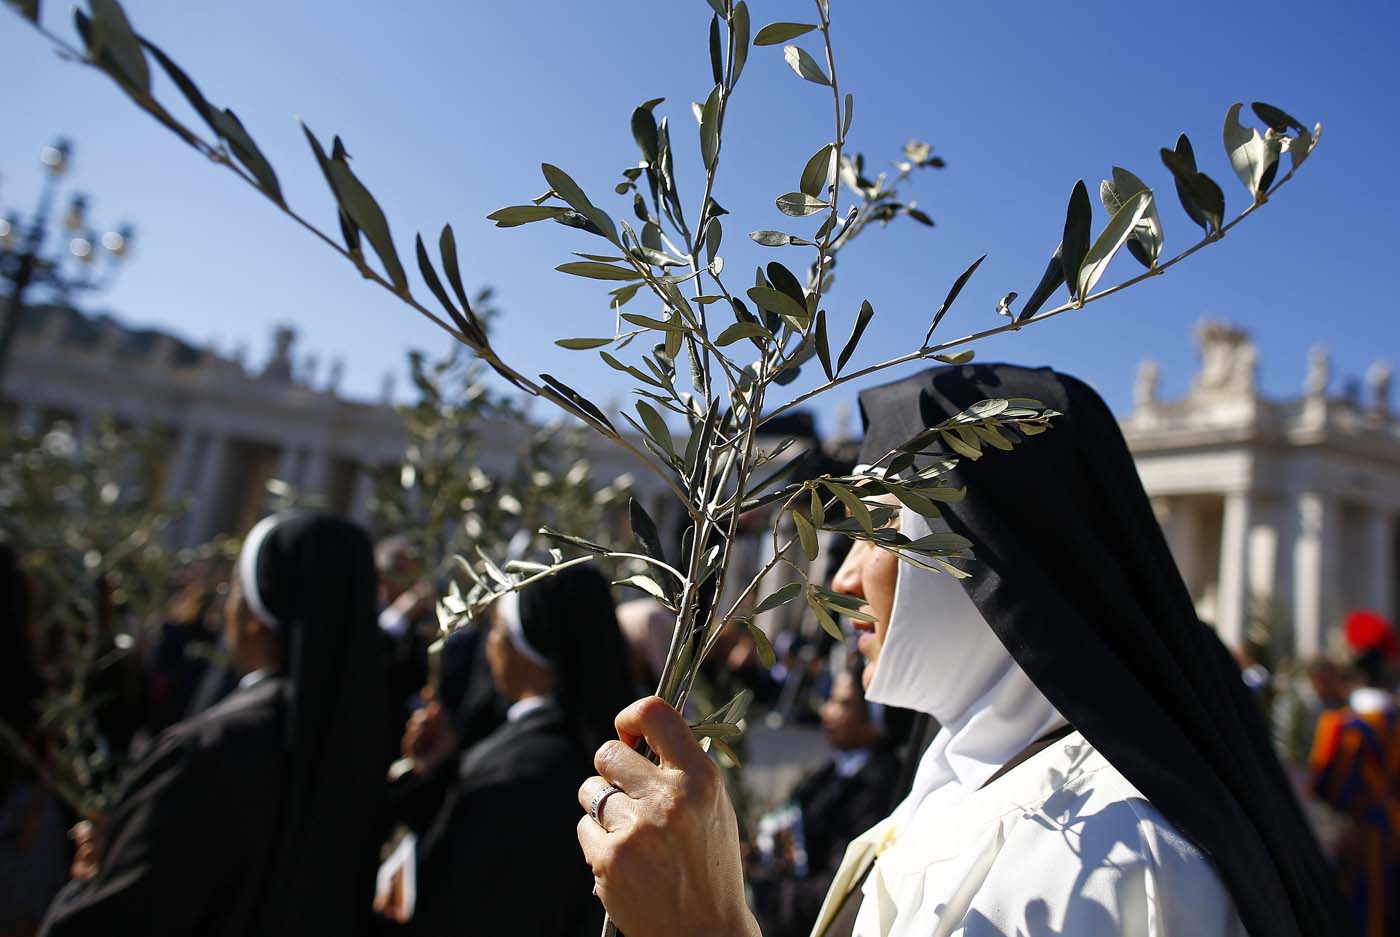 A nun holds a palm during the the Palm Sunday Mass led by Pope Francis in Saint Peter's Square at the Vatican April 9, 2017. REUTERS/Tony Gentile